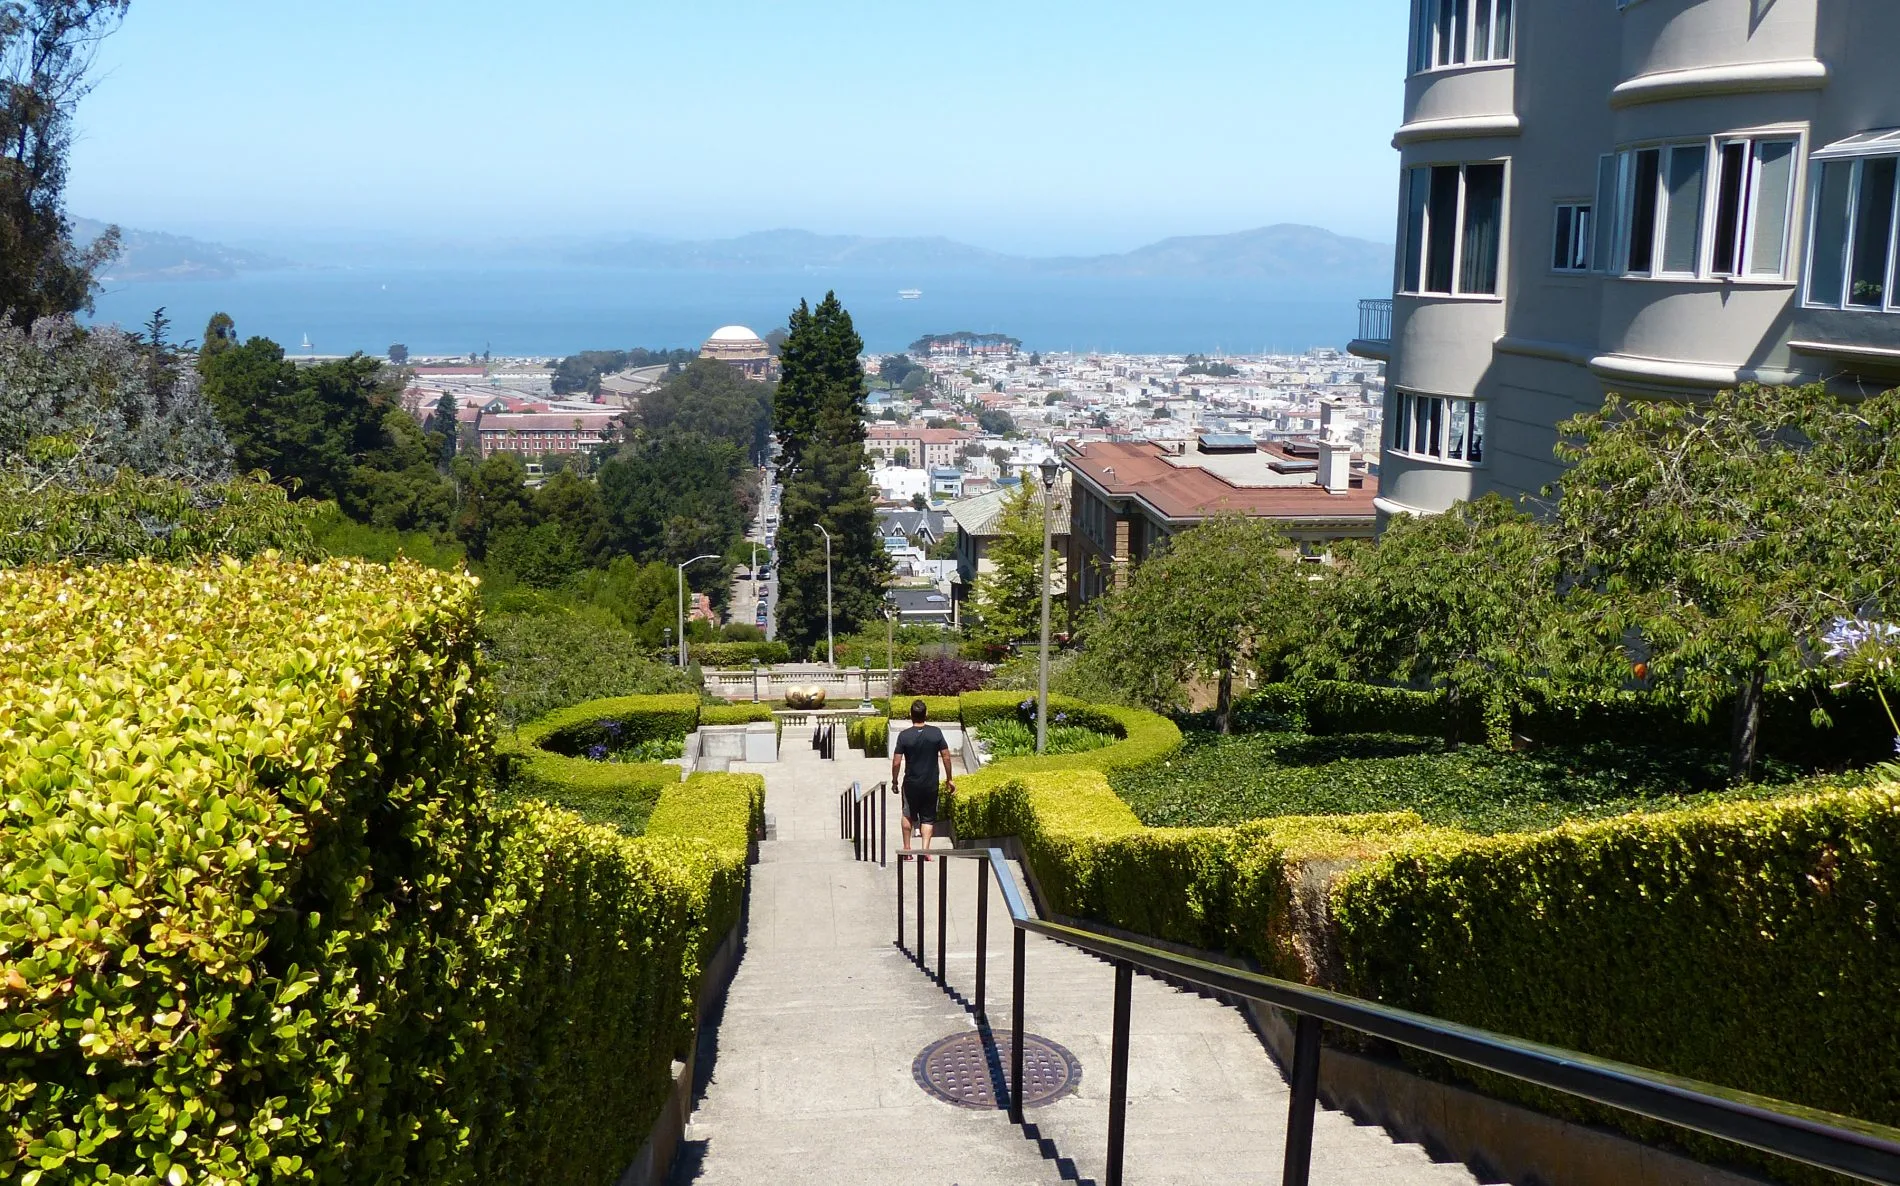 View from the top of the Lyon Street Steps in San Francisco overlooking the garden, steps, and the bay.